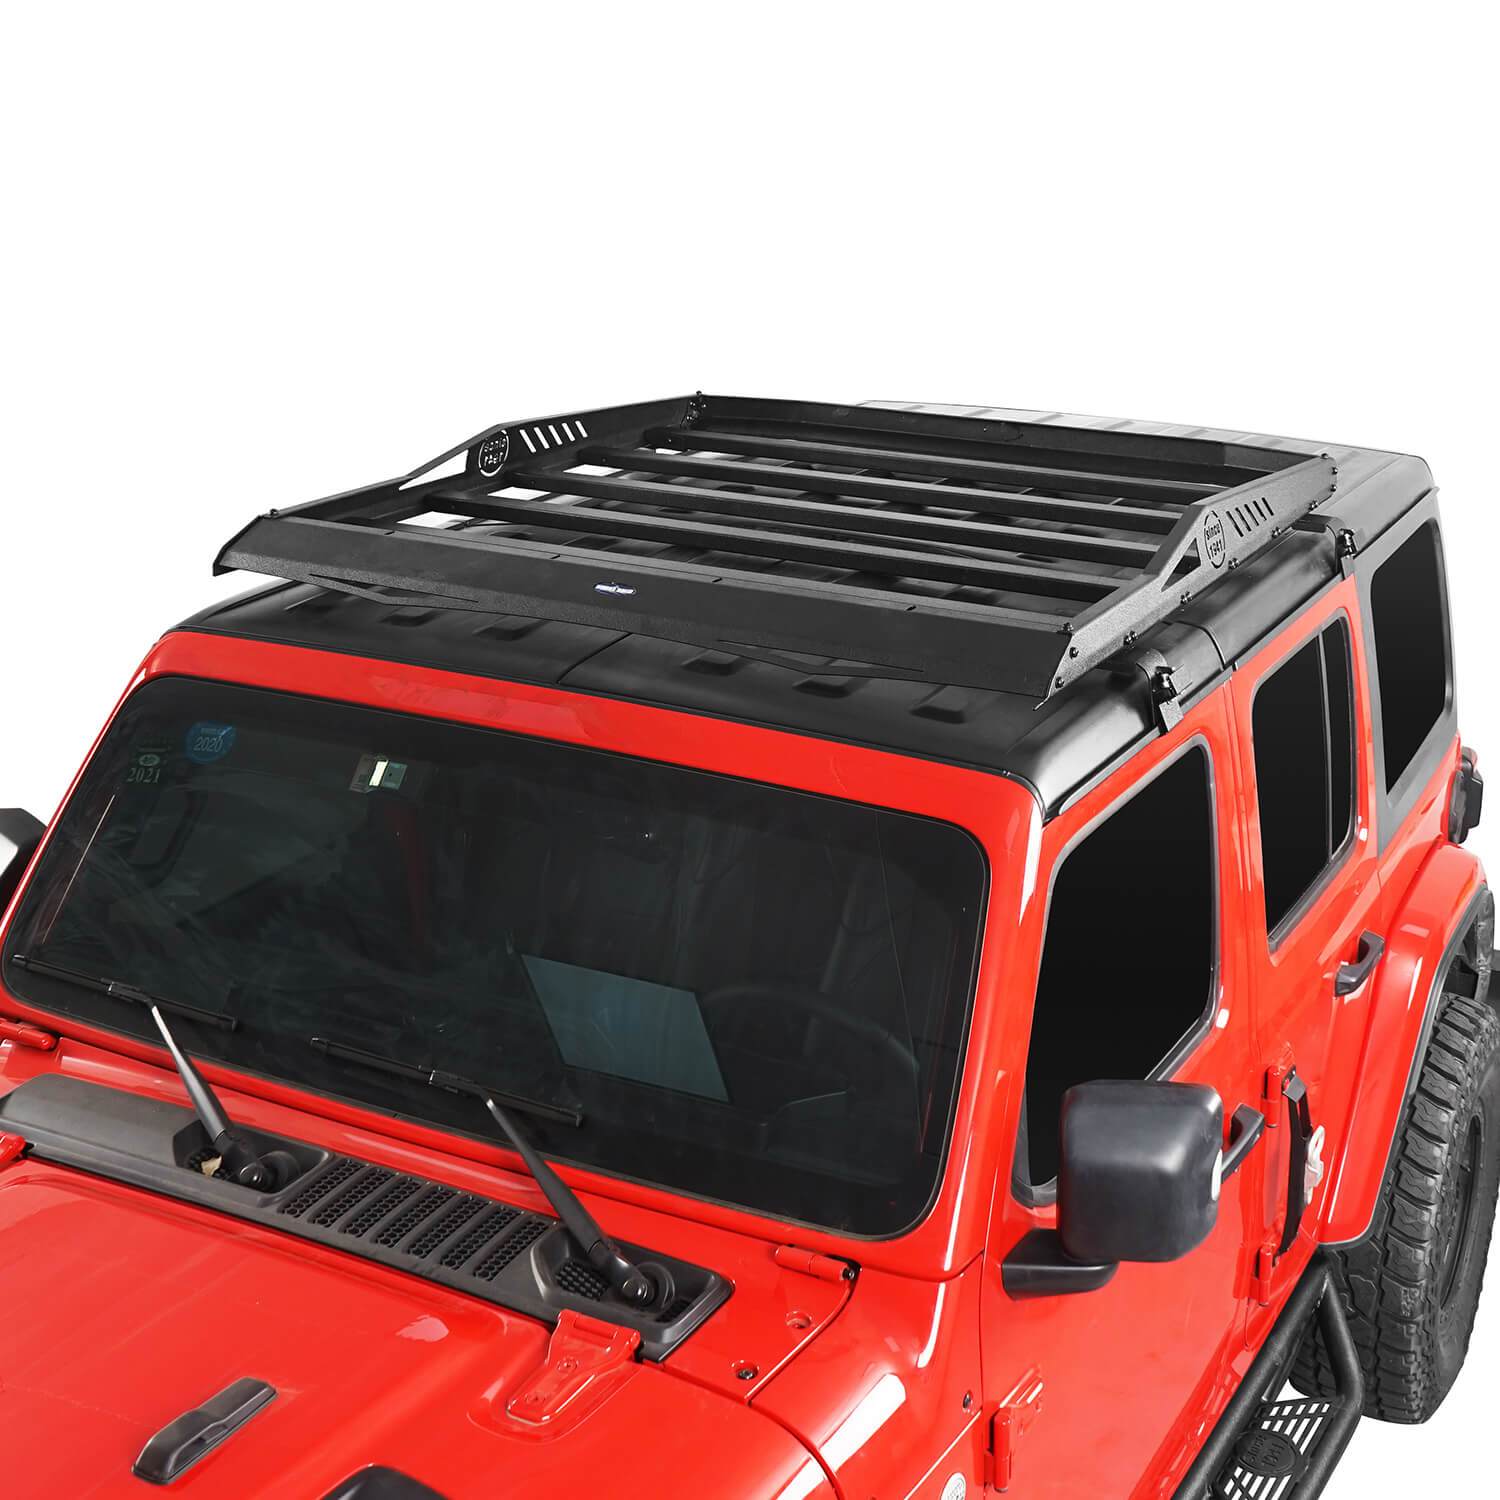 Roof baskets - CARGO CARRIERS & BASKETS - PRODUCTS